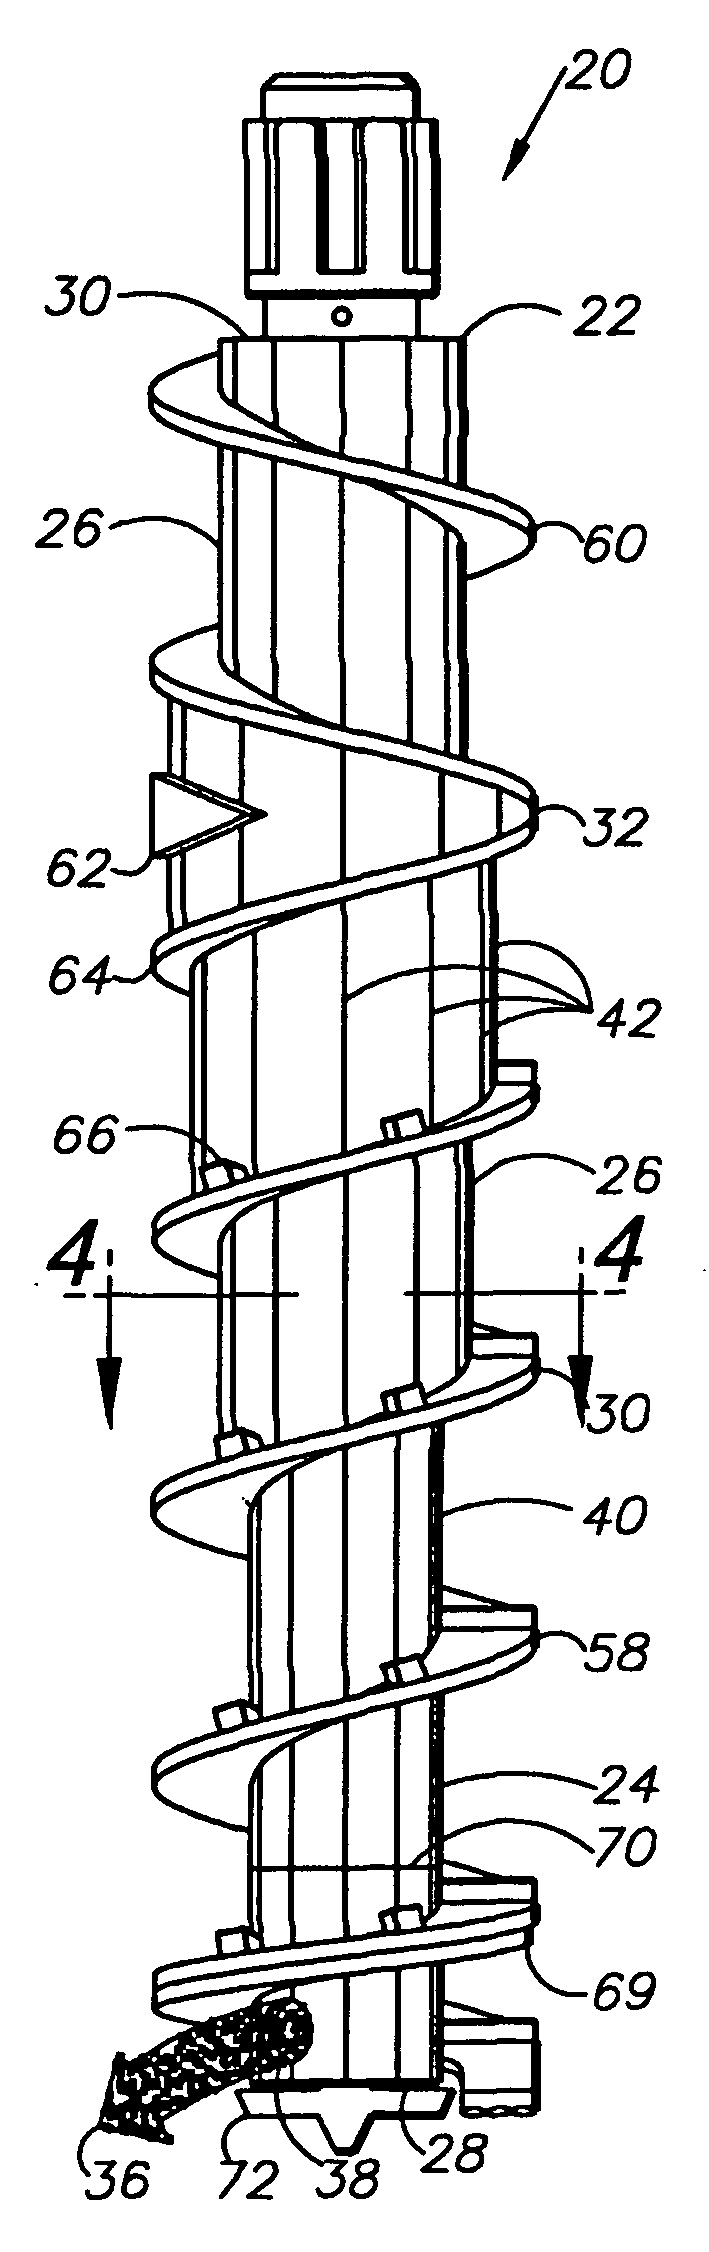 Full-displacement pressure grouted pile system and method